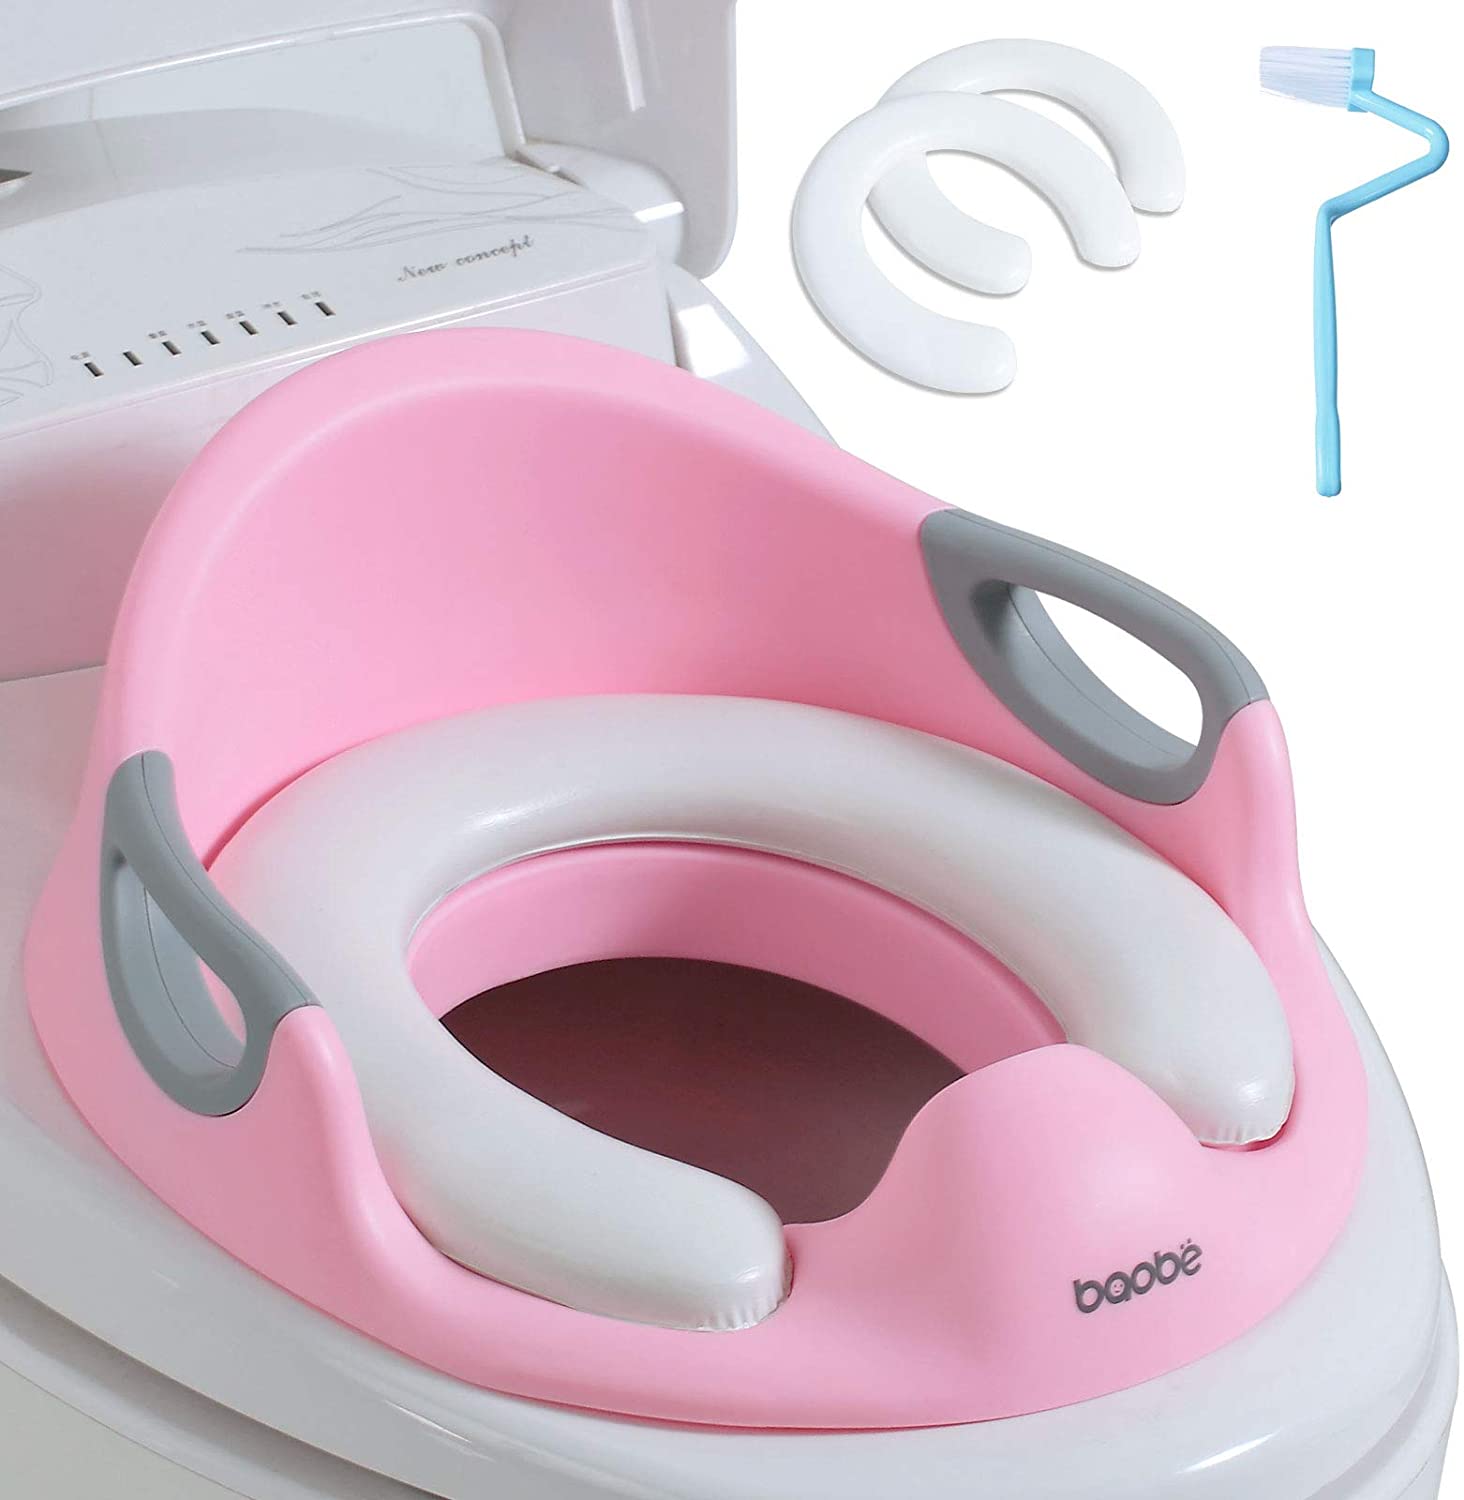 Super Lowest Price Baby Skin Care Products - Potty Training Seat for Kids Toddlers, Toilet Seat for Baby with Cushion Handle and Backrest, Toilet Trainer for Round and Oval Toilets (Pink) – ...